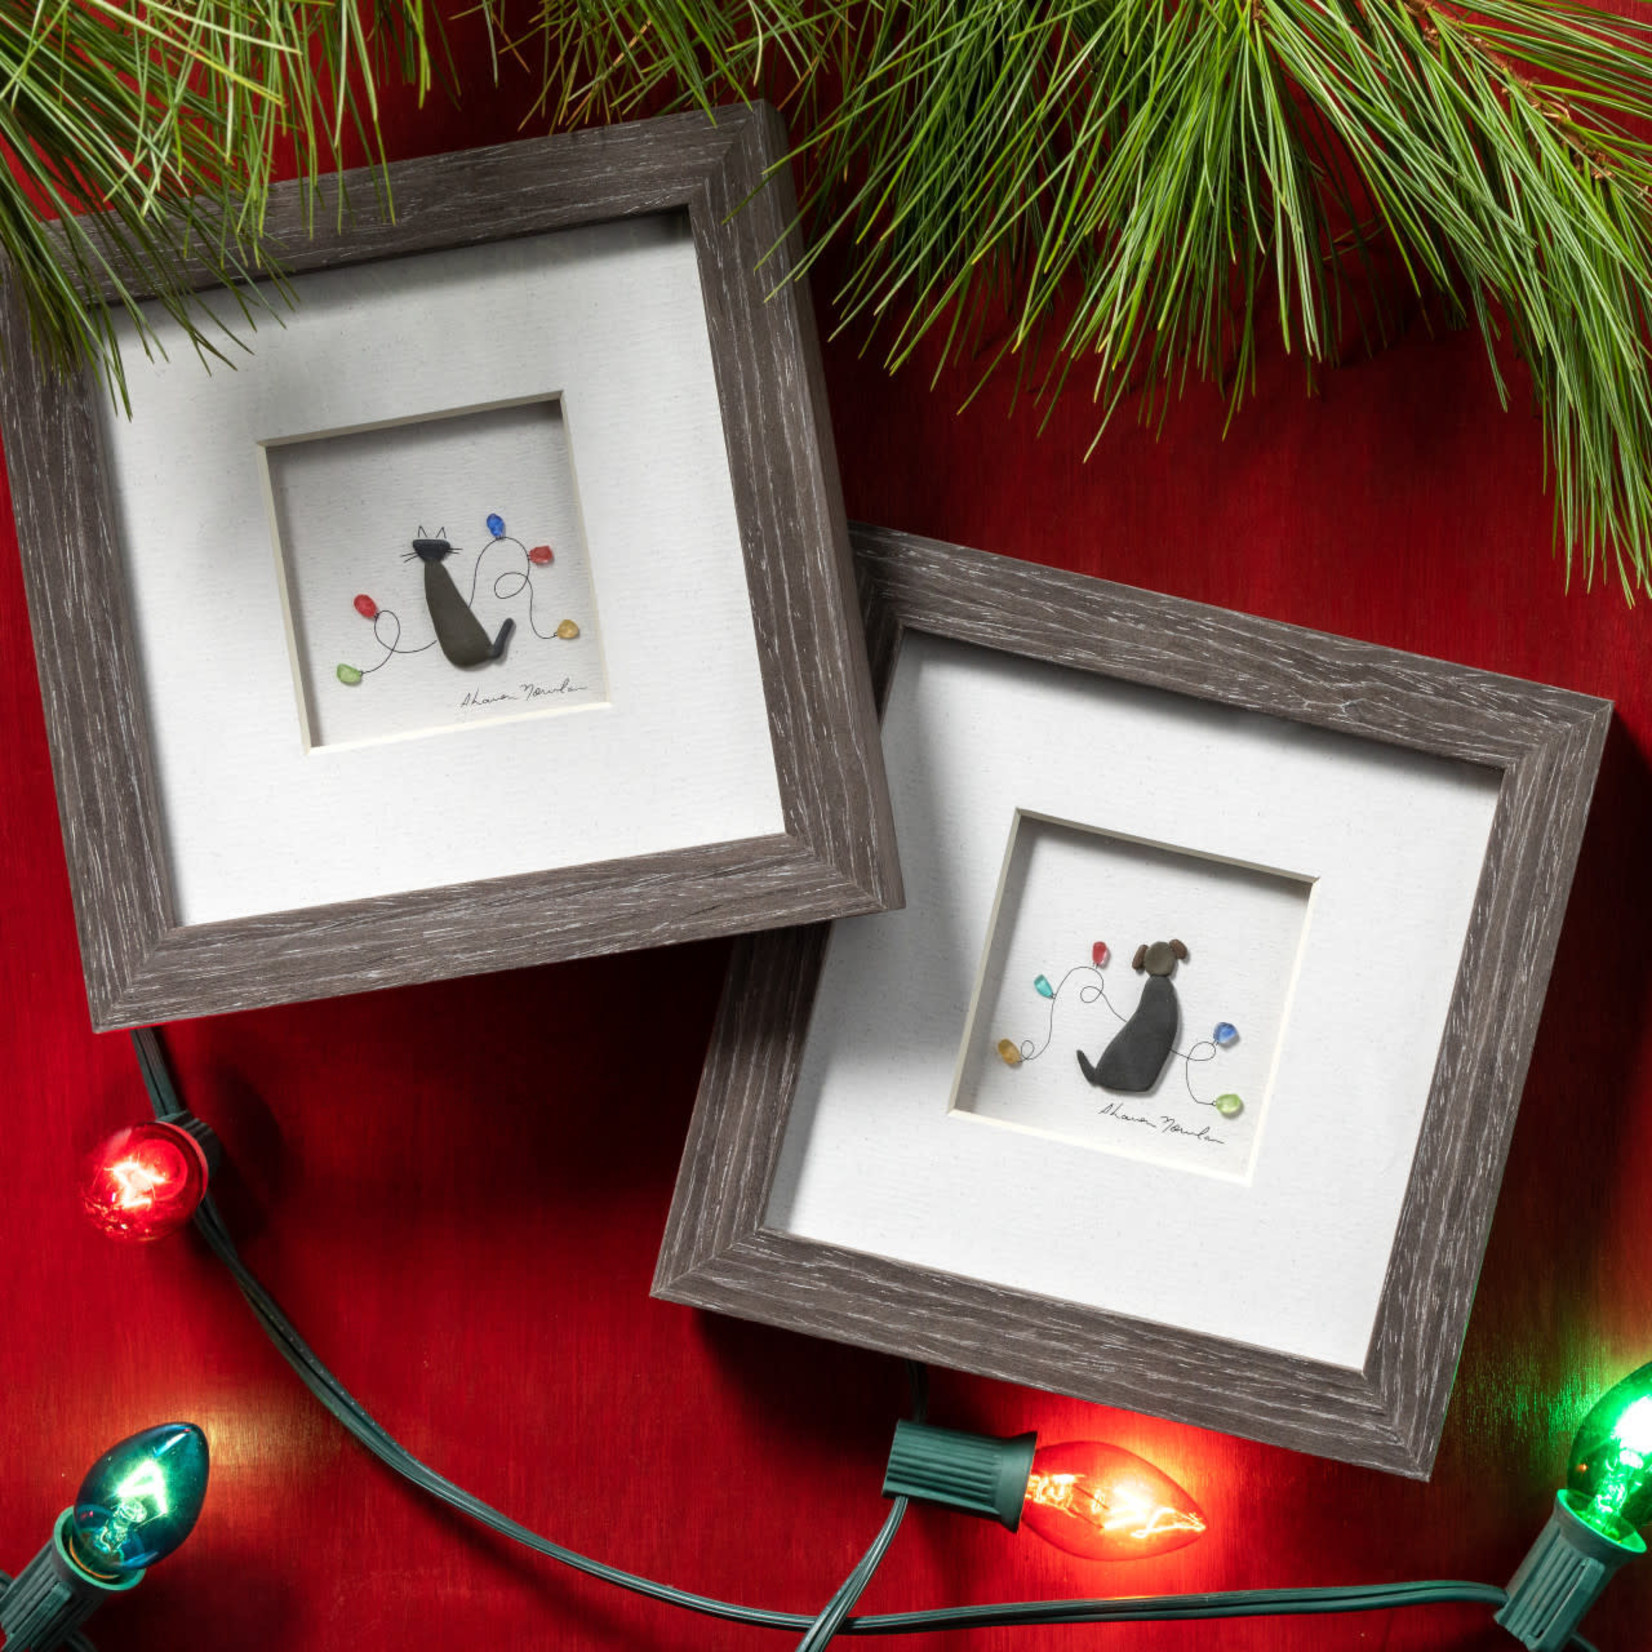 PURRFECT HOLIDAY STONE WALL ART